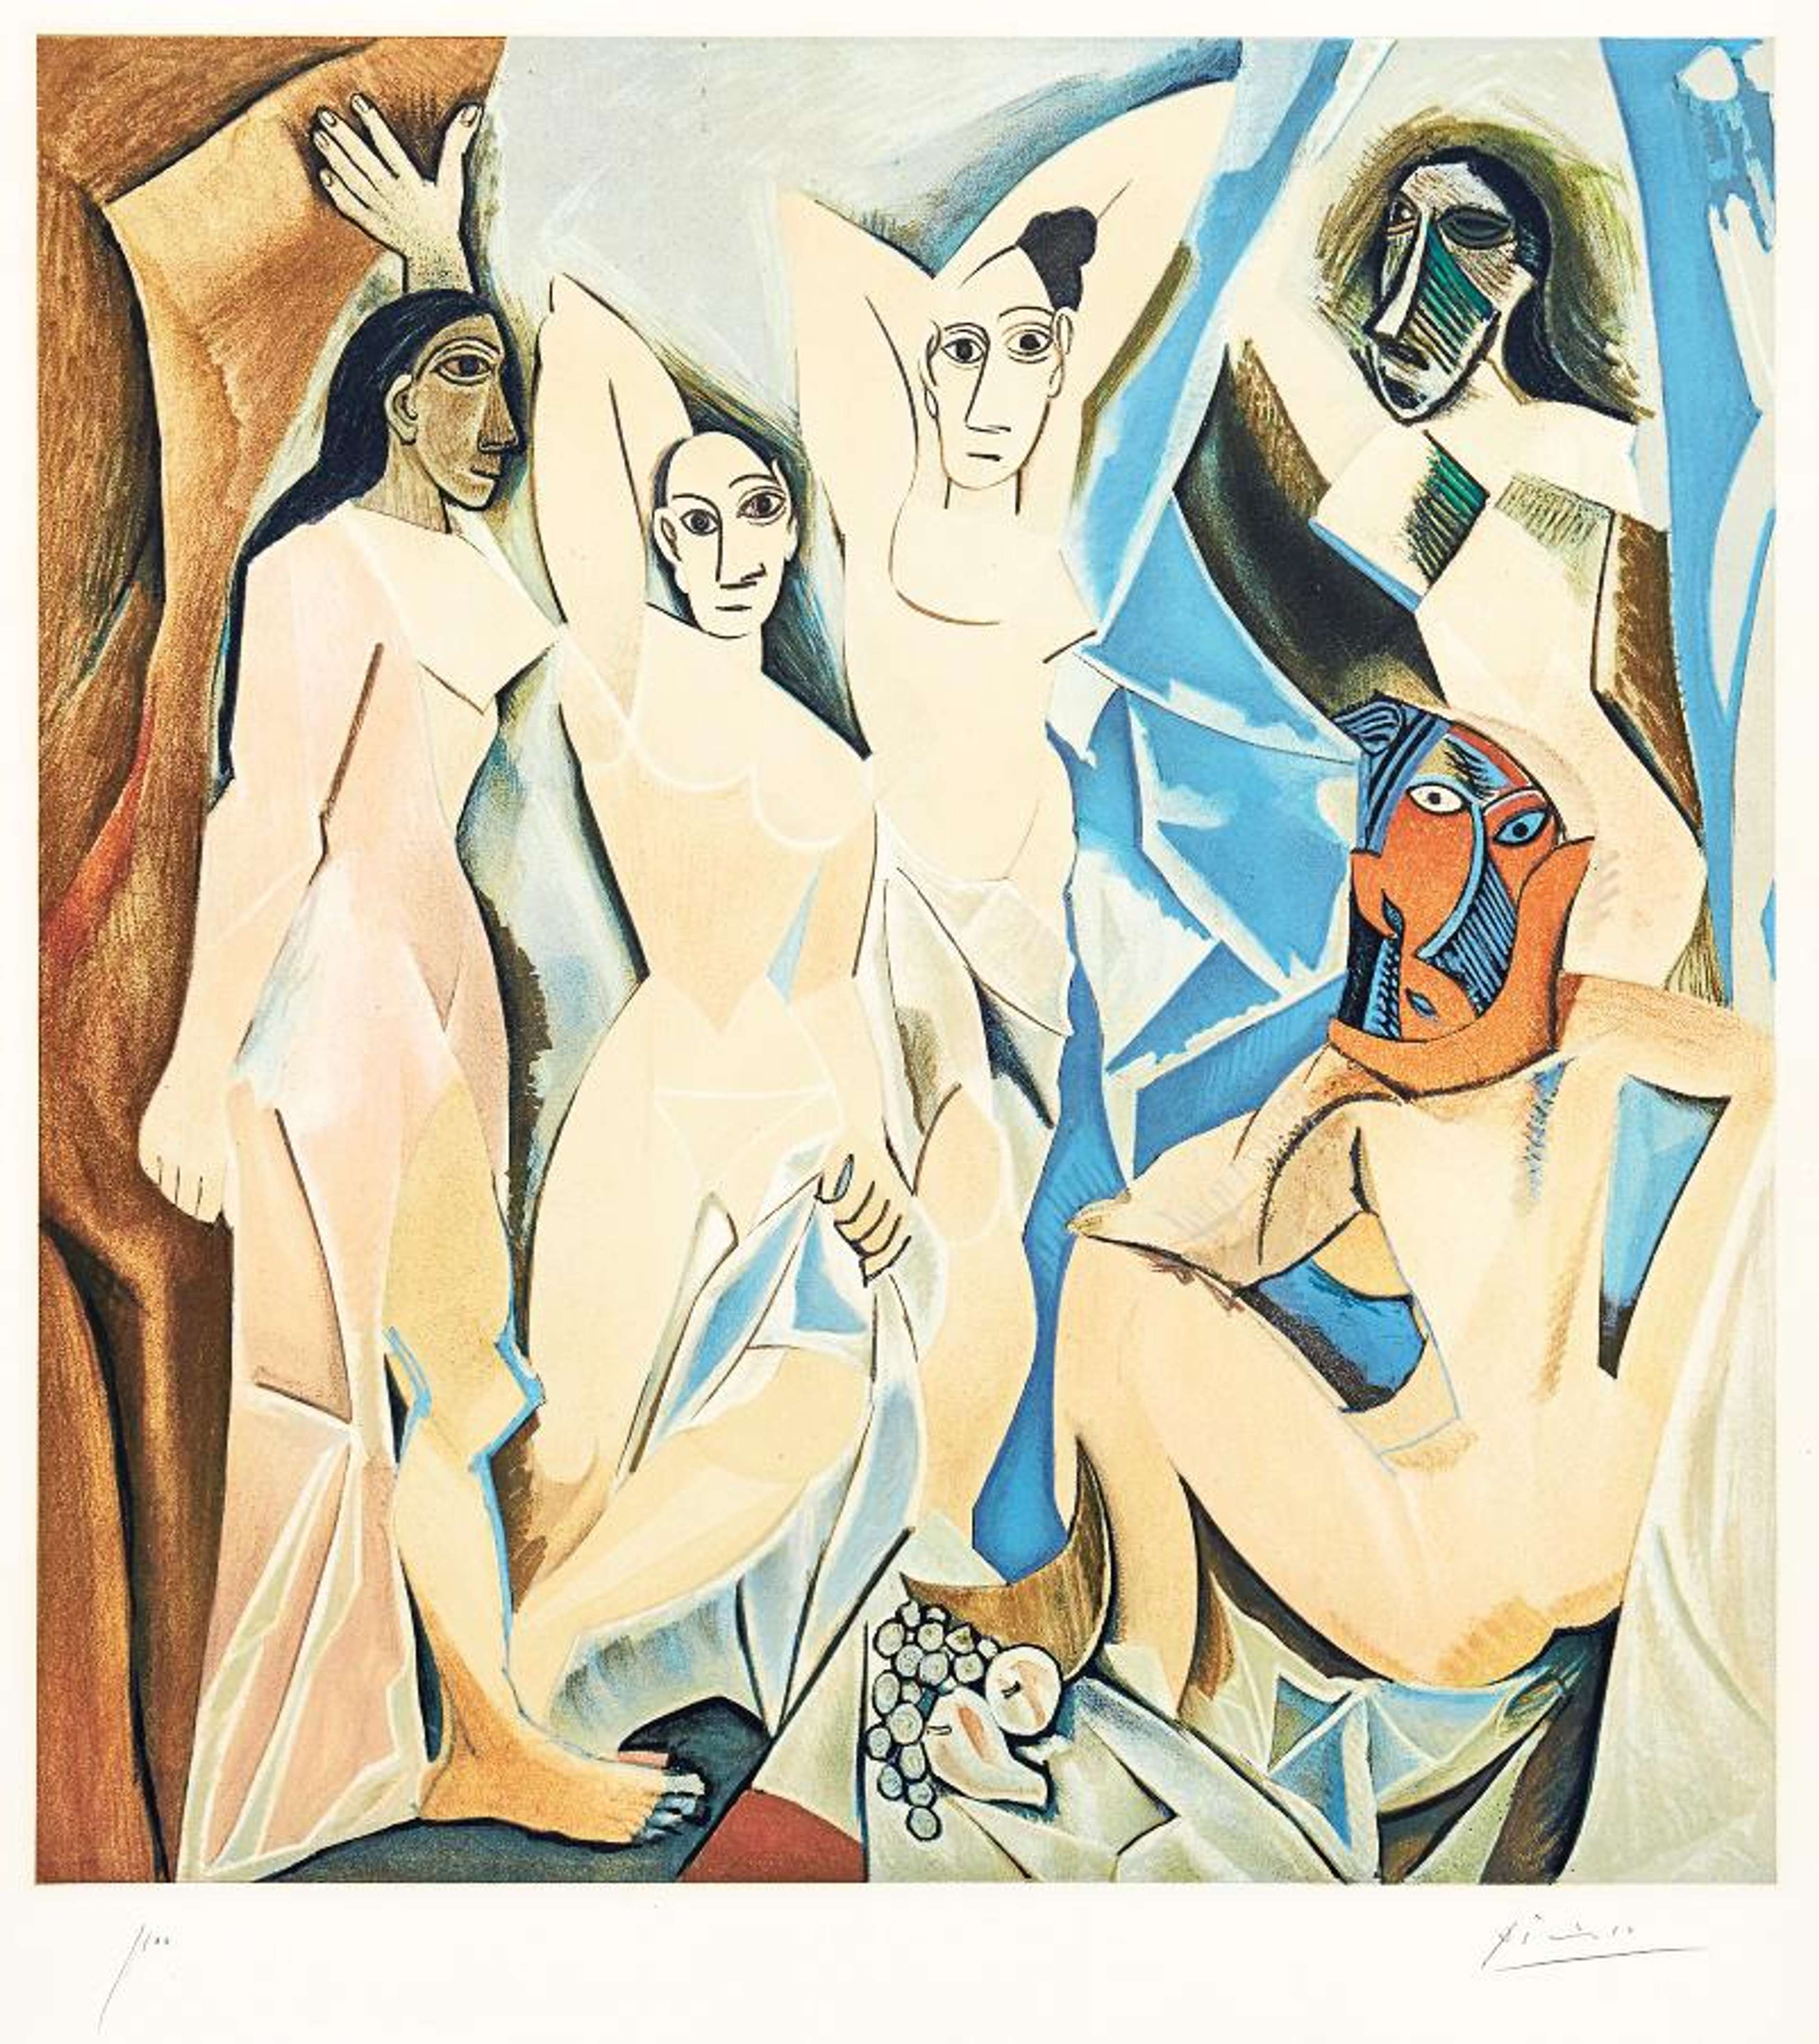 An image of the work Les Demoiselles Avignon by Pablo Picasso. It shows a group of nude female figures, depicted in Picasso's cubist geometric style. The colour palette is mostly composed of pinks and blues.